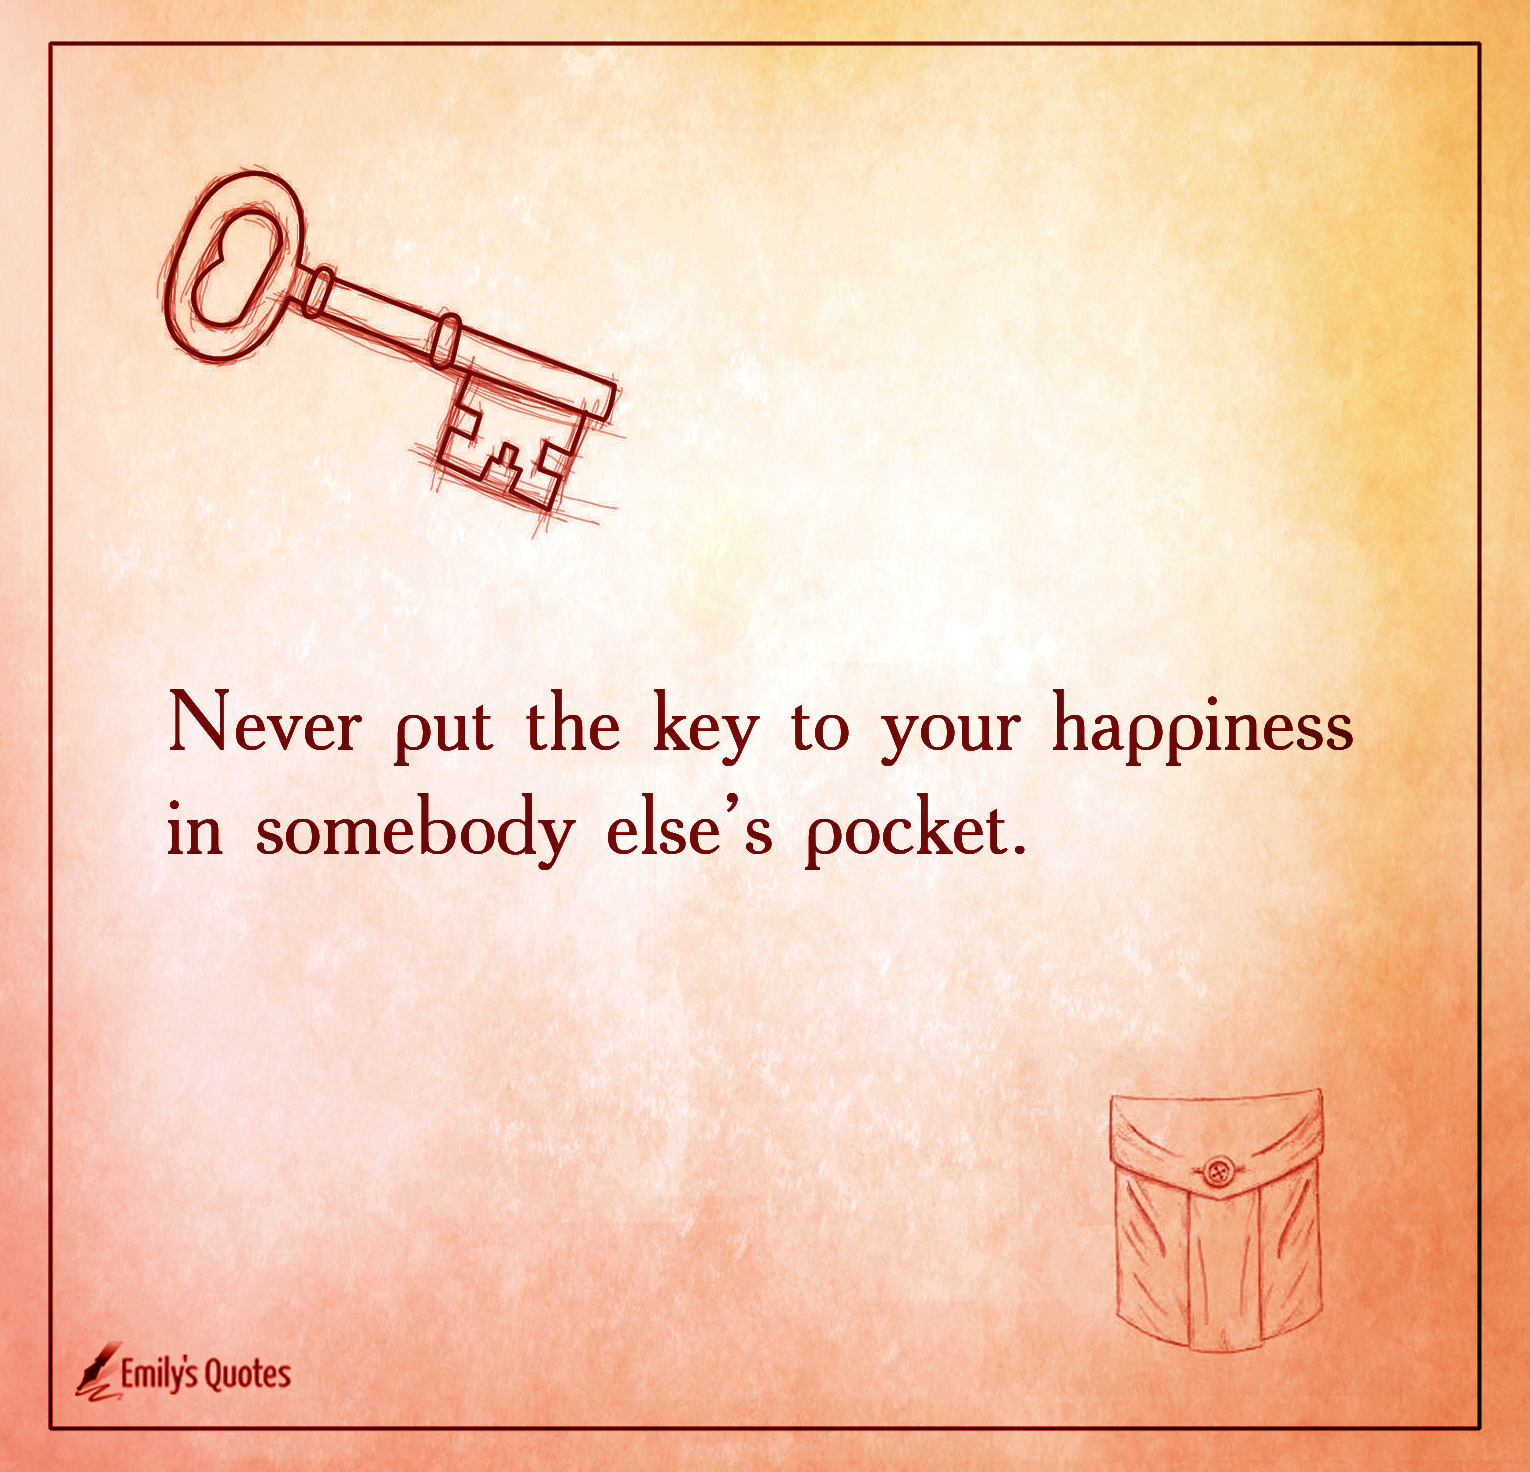 Never put the key to your happiness in somebody else’s pocket